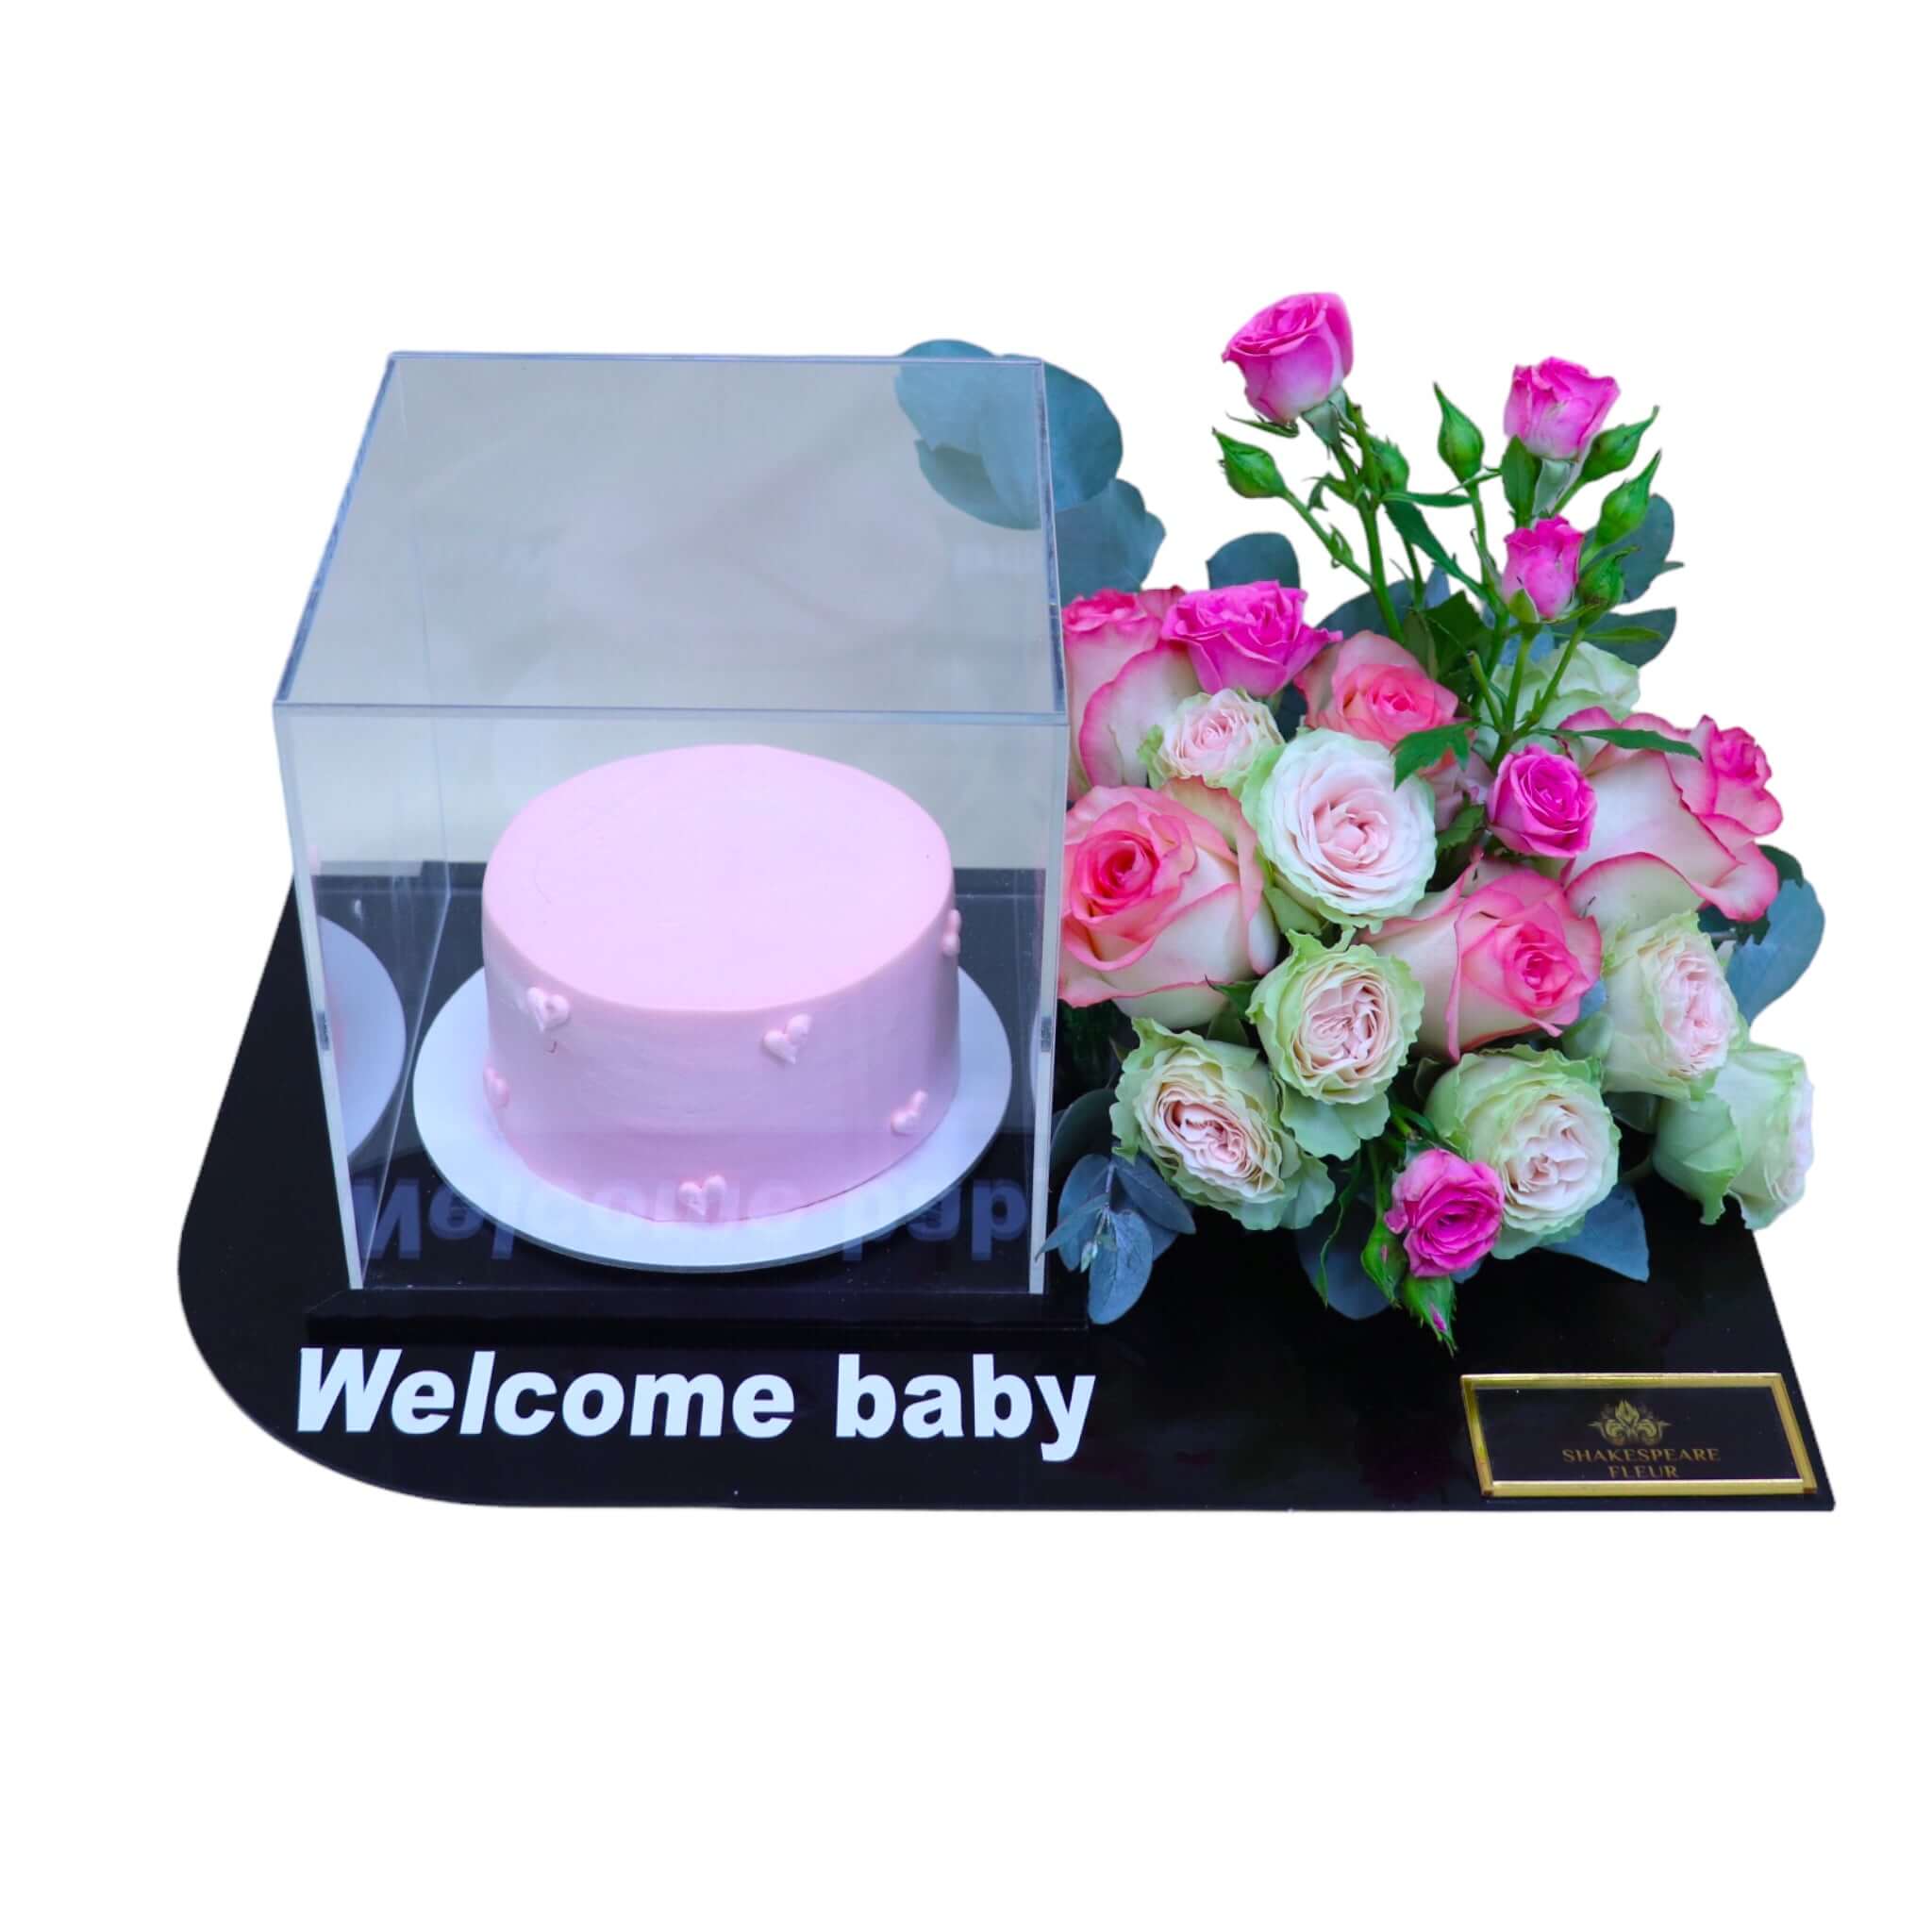 PINK FLOWER AND CAKE 527